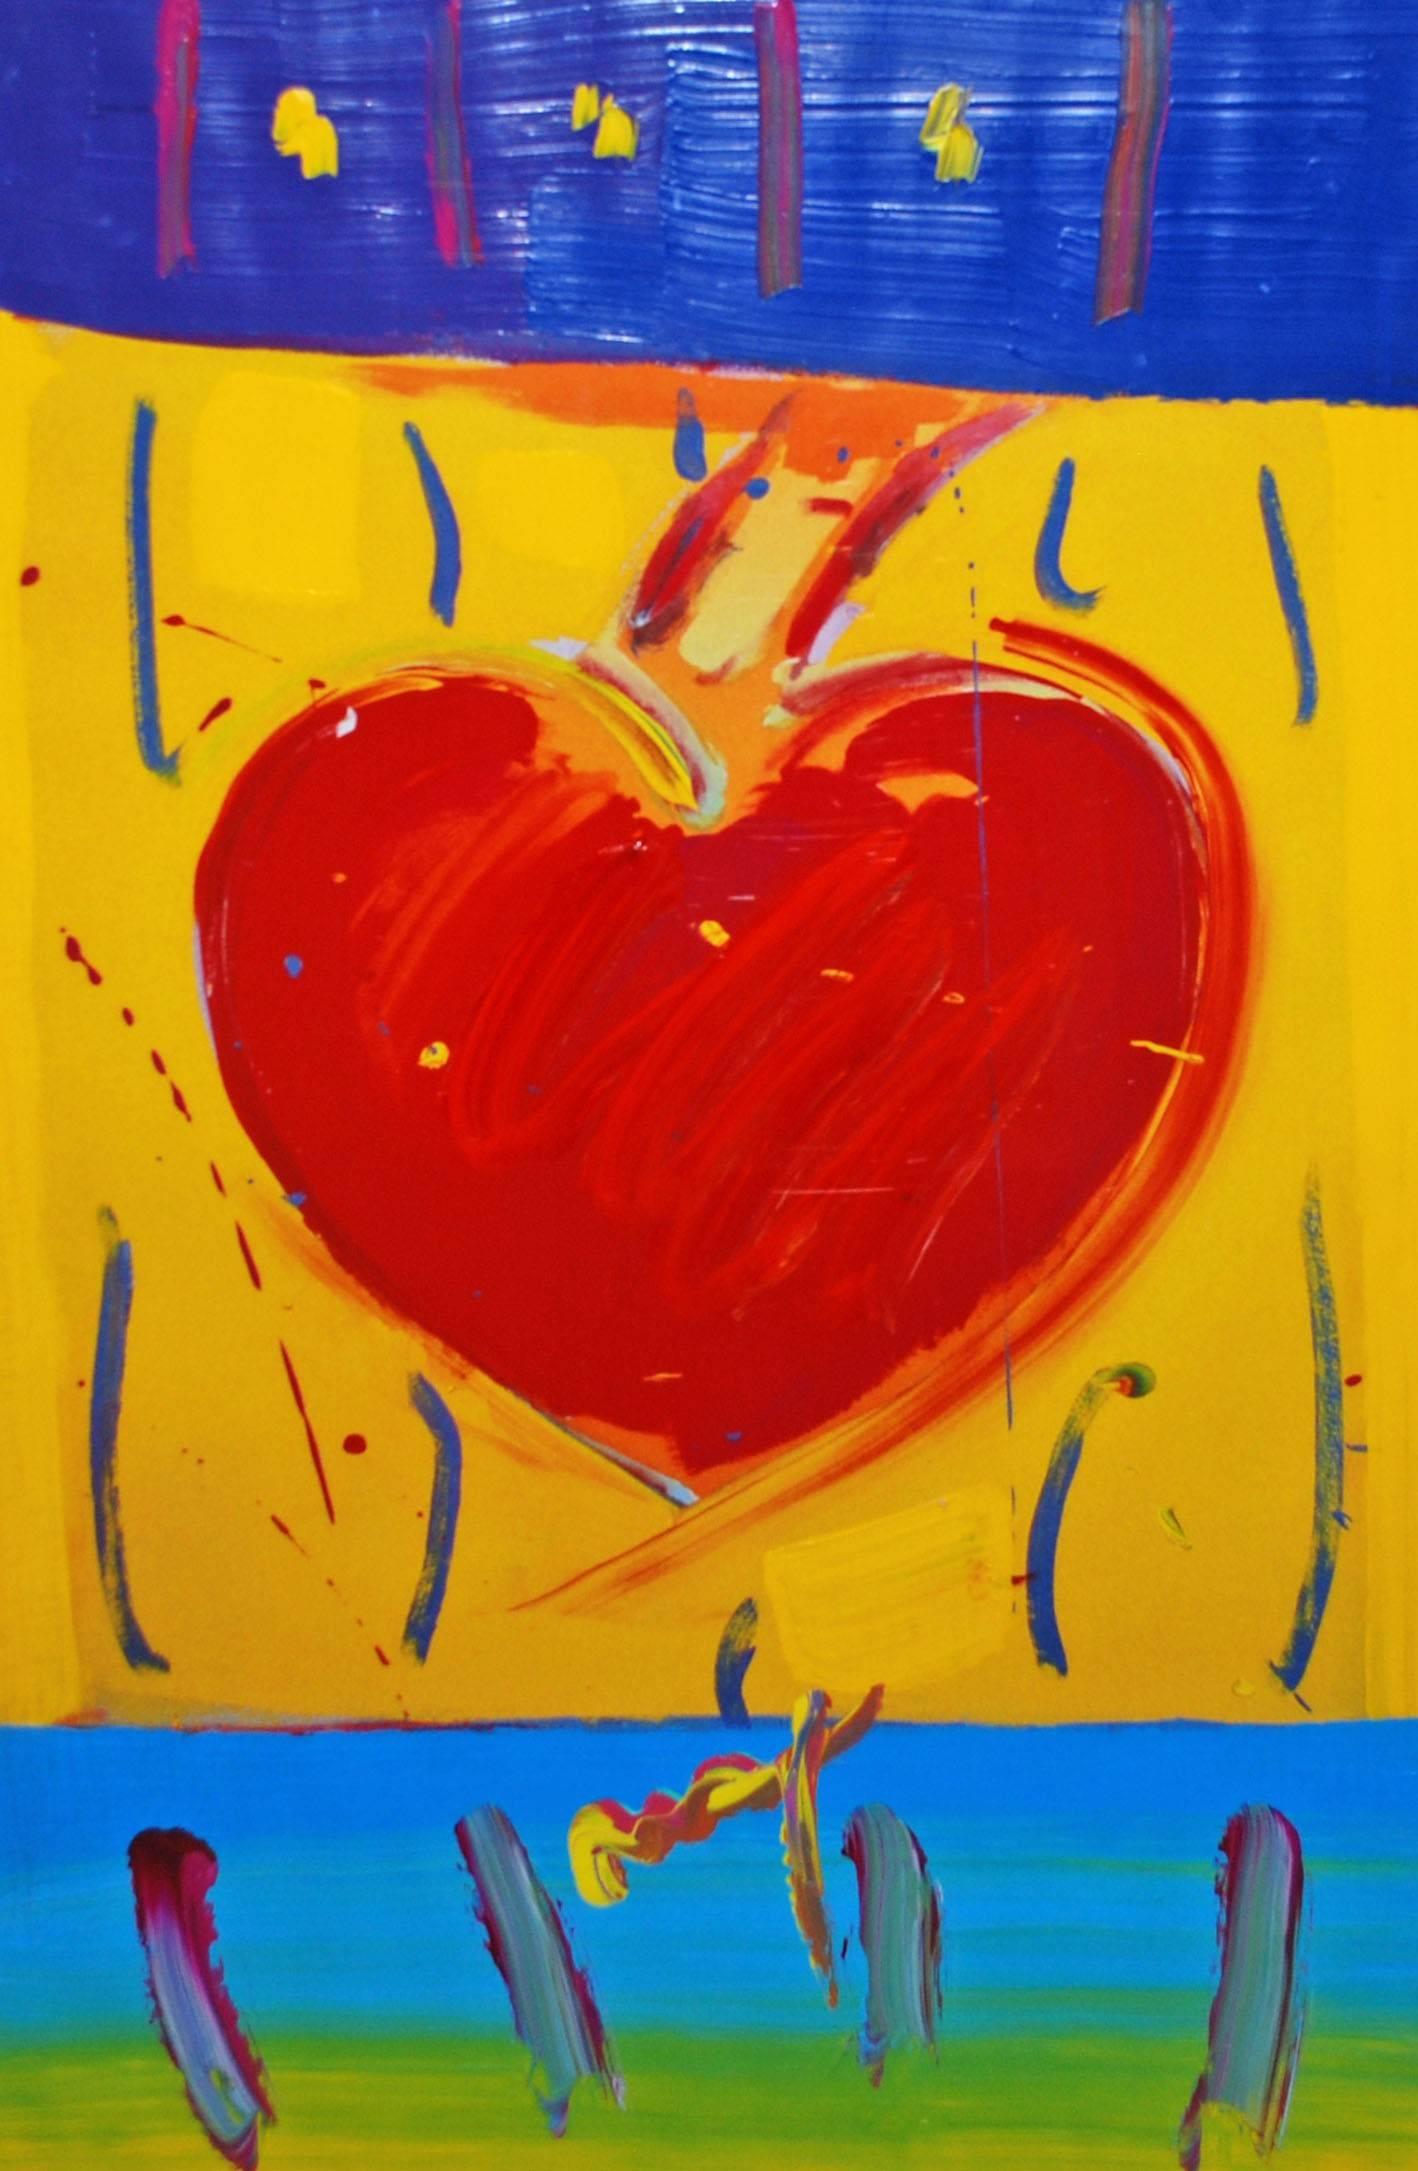 Lotta Love - Painting by Peter Max